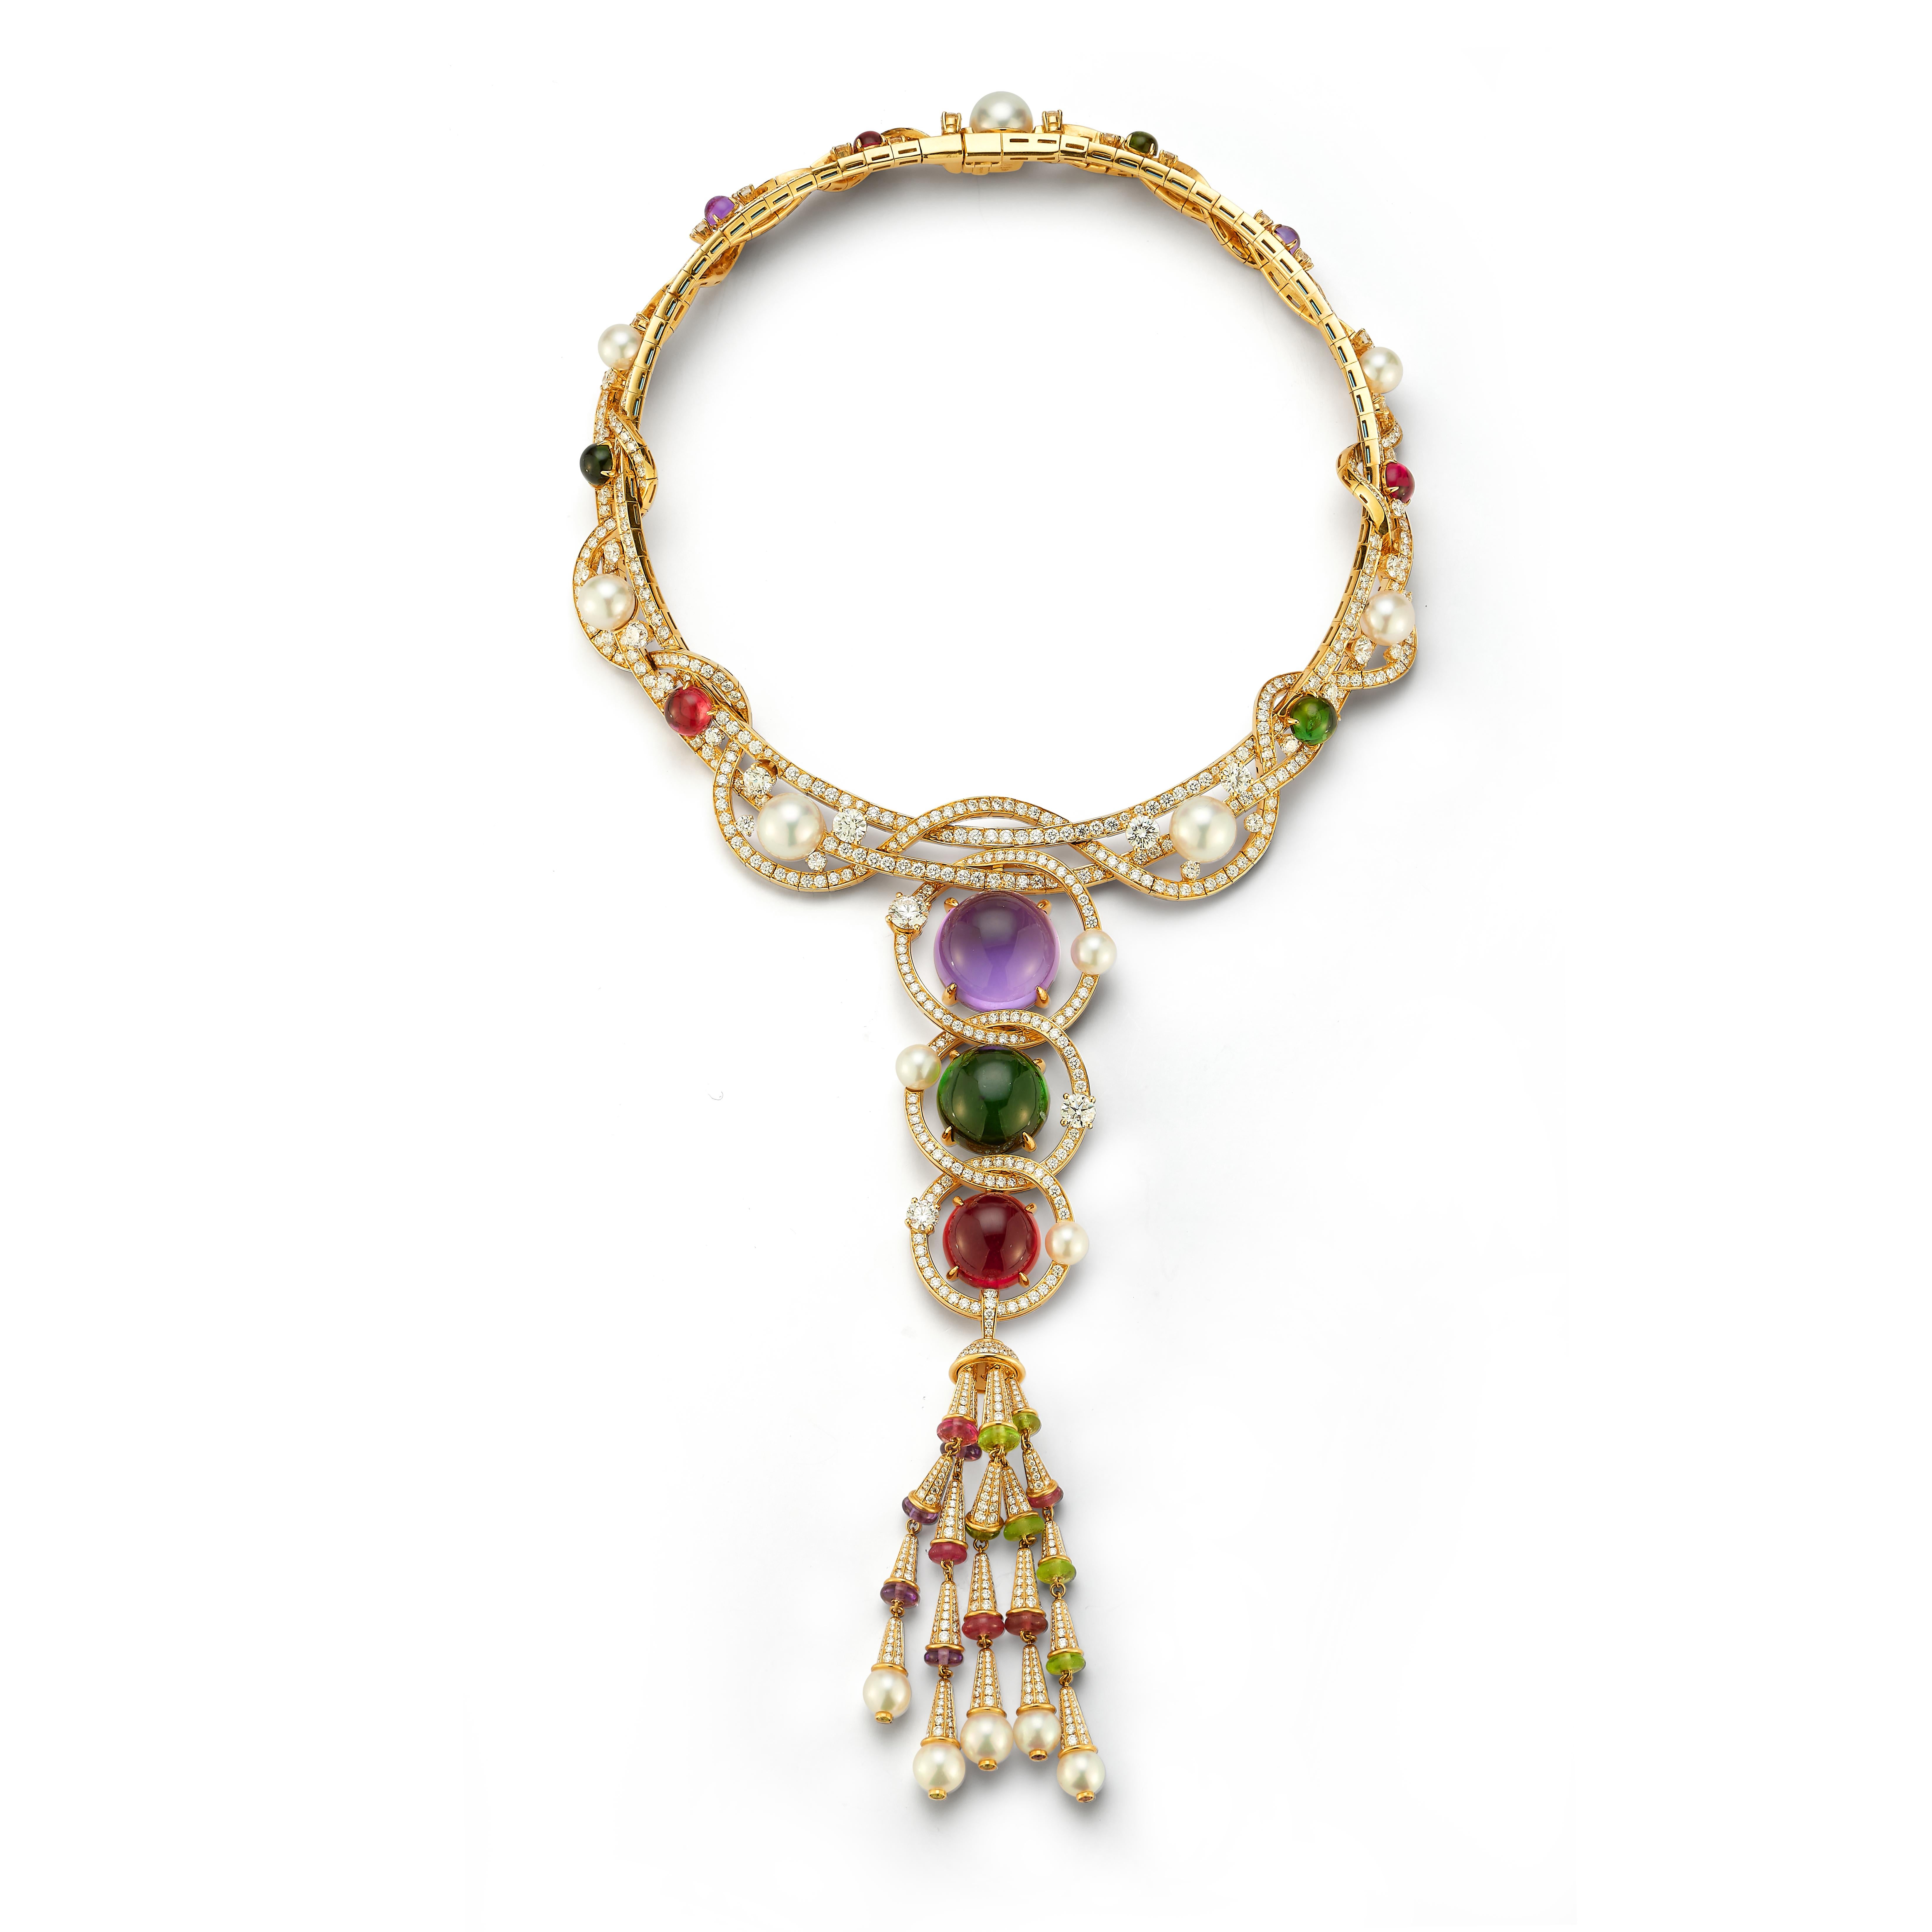 Bulgari Multi Gem & Diamond Tassel Necklace

An 18 karat yellow gold necklace set throughout with round cut diamonds the largest weighing 1.07 carats, further set with Akoya and South Sea cultured pearls, amethysts, peridots, rubellites, and green